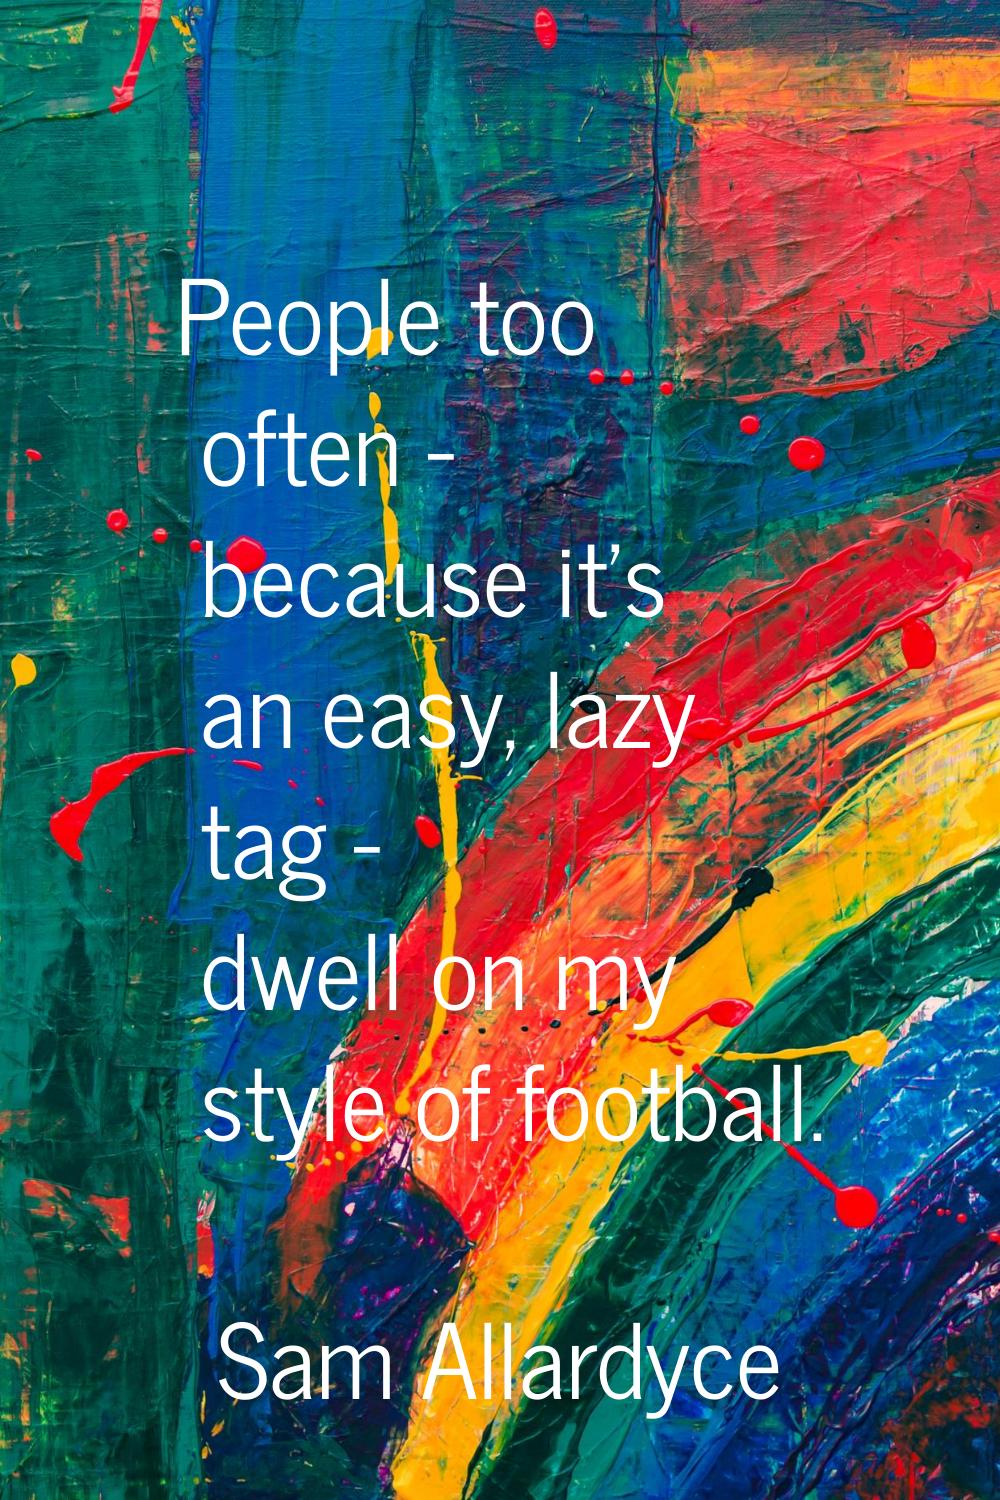 People too often - because it's an easy, lazy tag - dwell on my style of football.